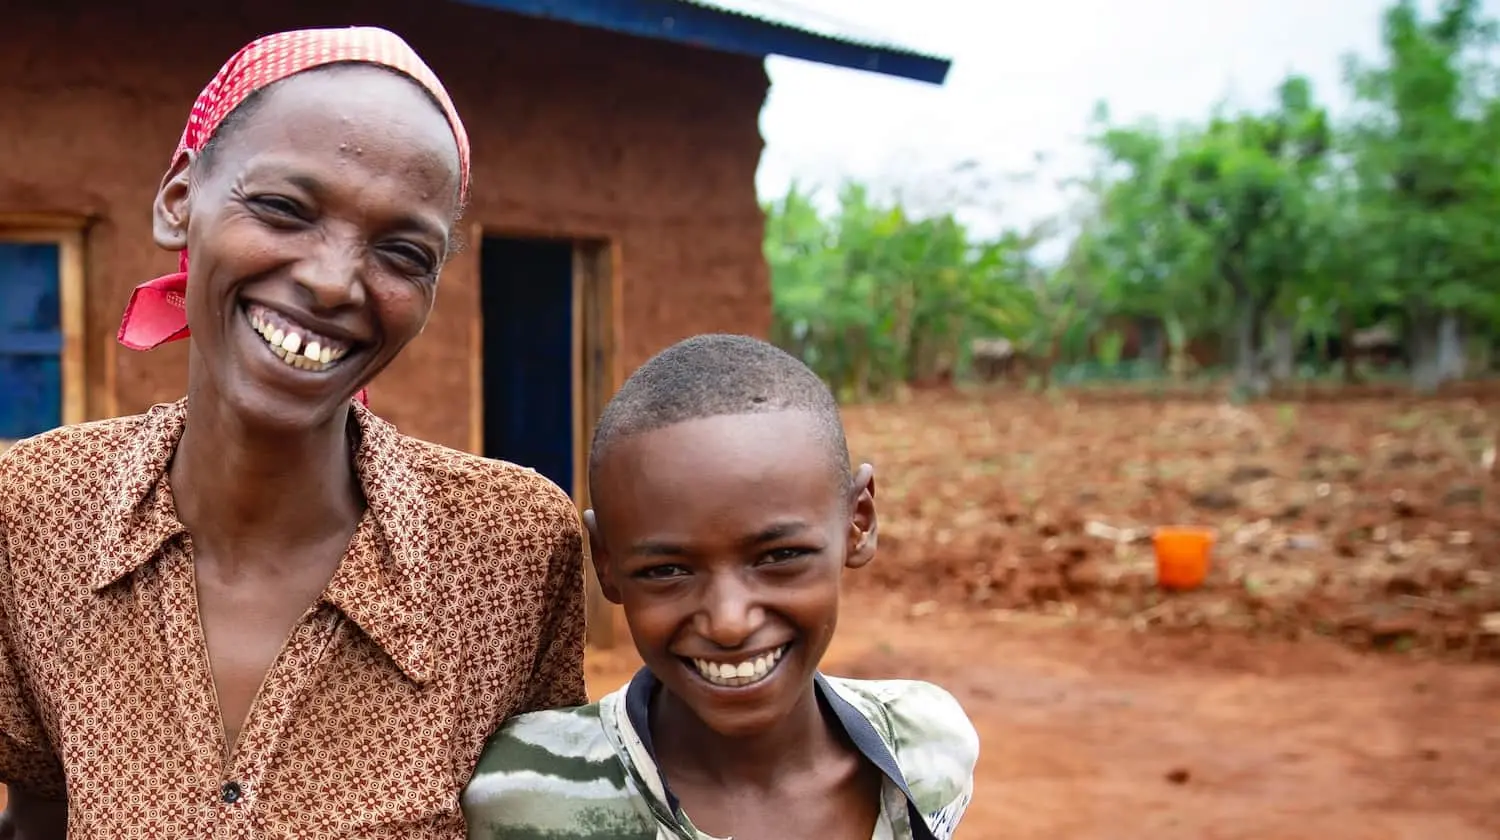 Workinesh Alto with her sons, Assamimow and Abinet, outside the new family home, built with profits from her agricultural trading business, which she set up in the wake of taking part in REGRADE, a graduation-based program run by Concern in SNNPR, Ethiopia.